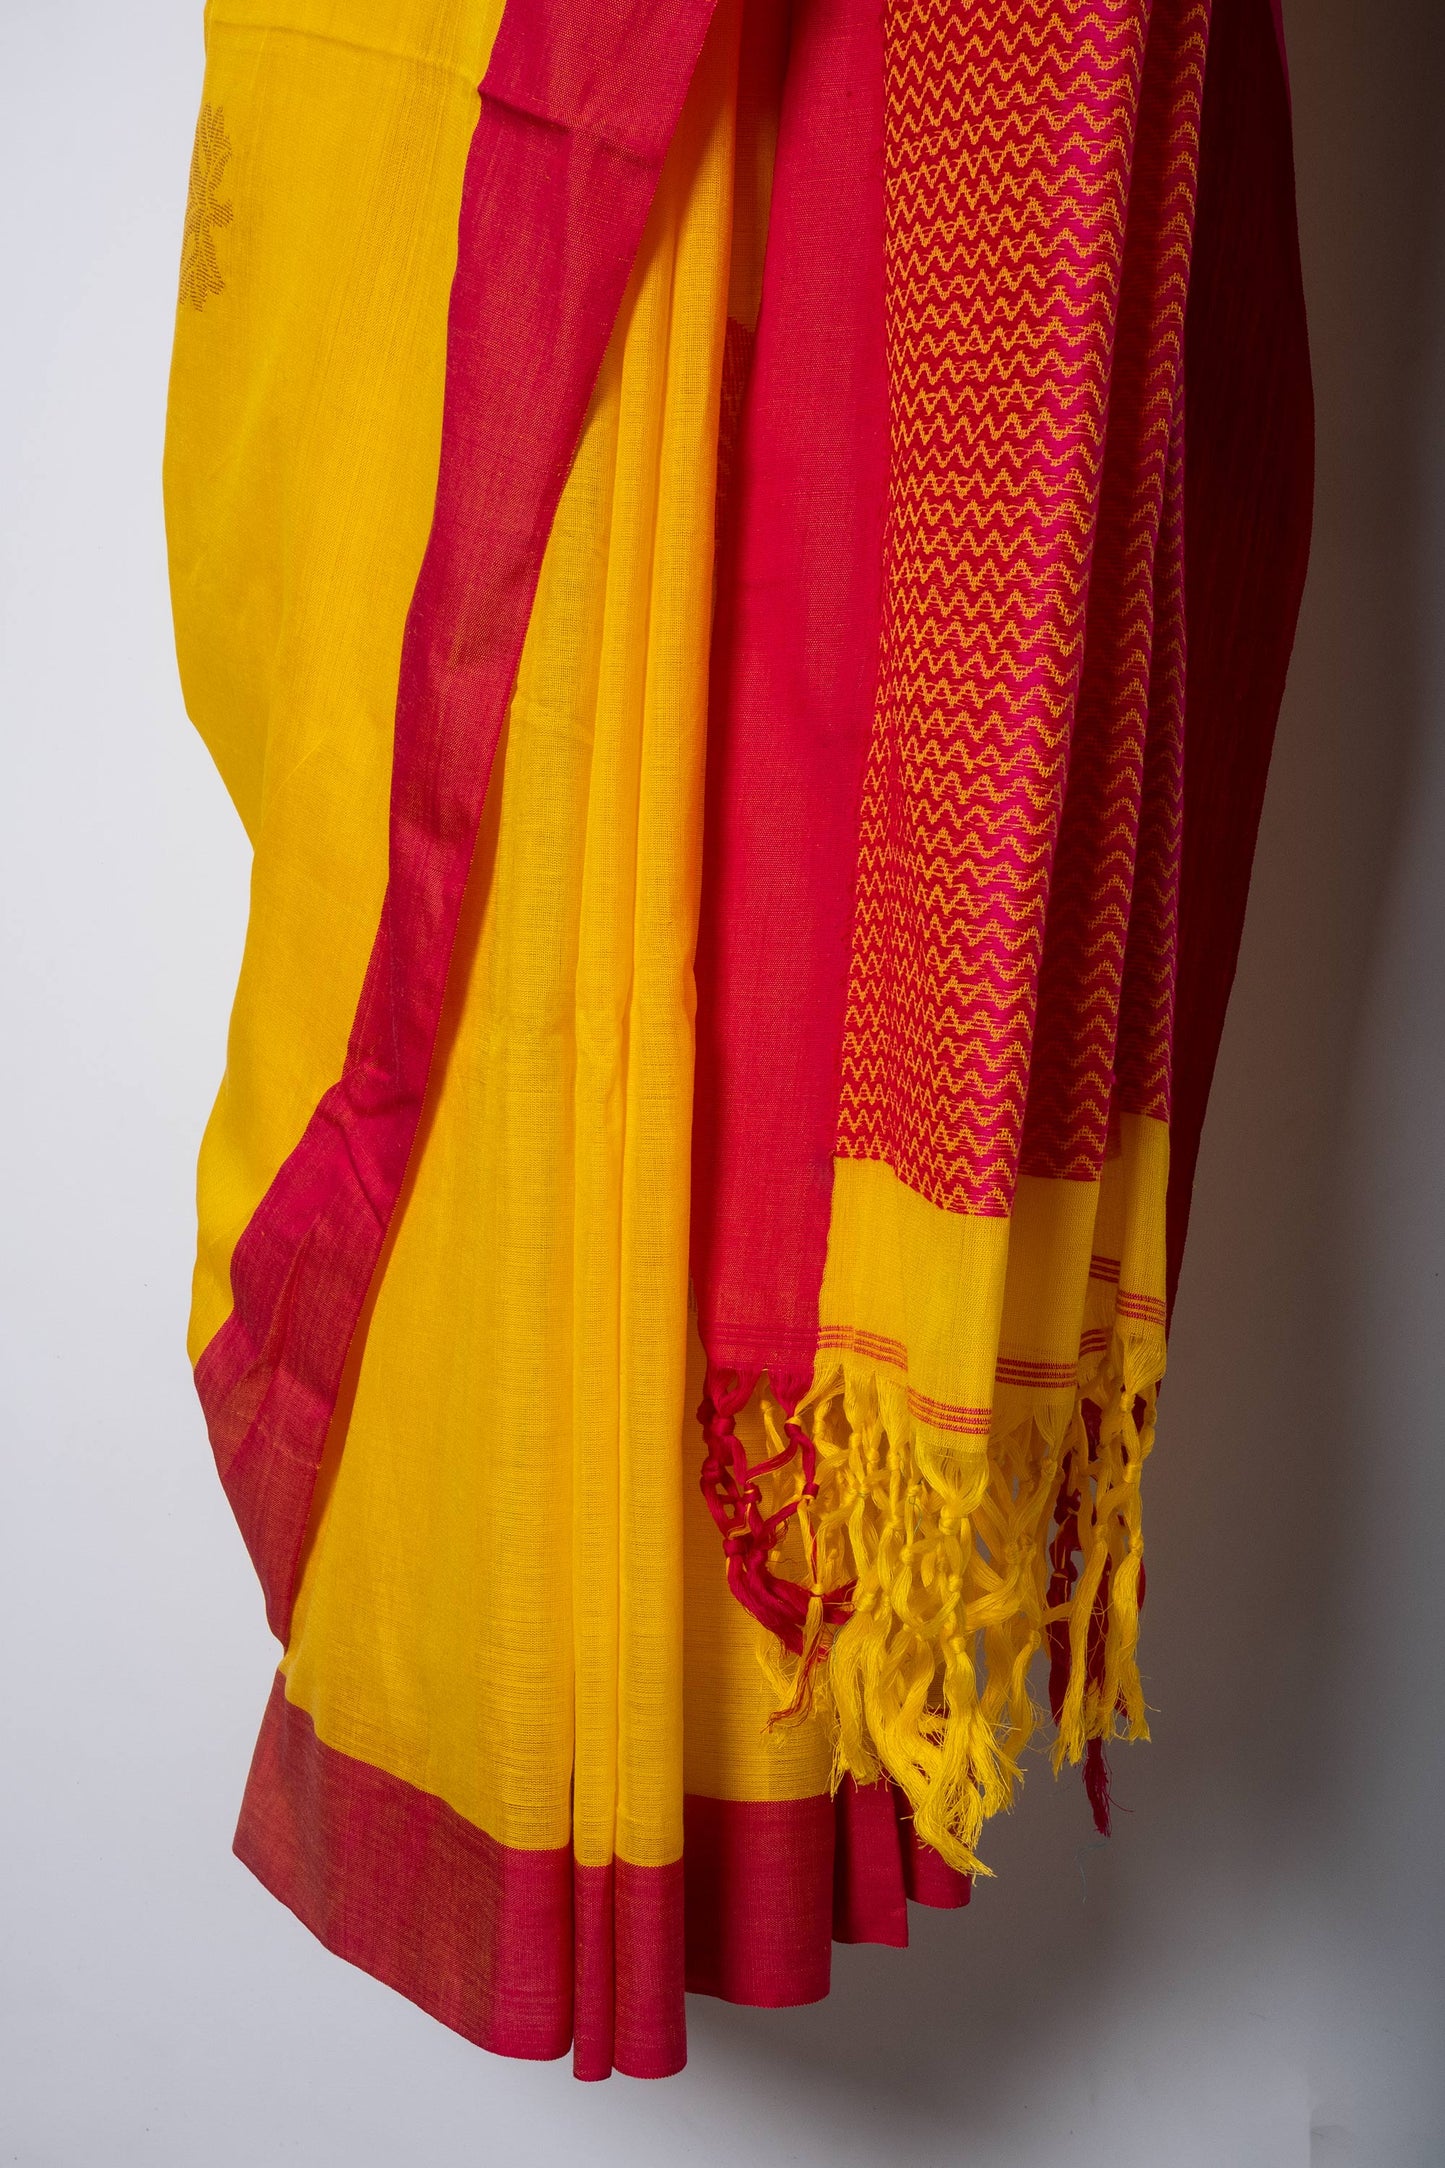 Yellow Handwoven Red Border Saree with Red and Rose Gold Leaf Motifs